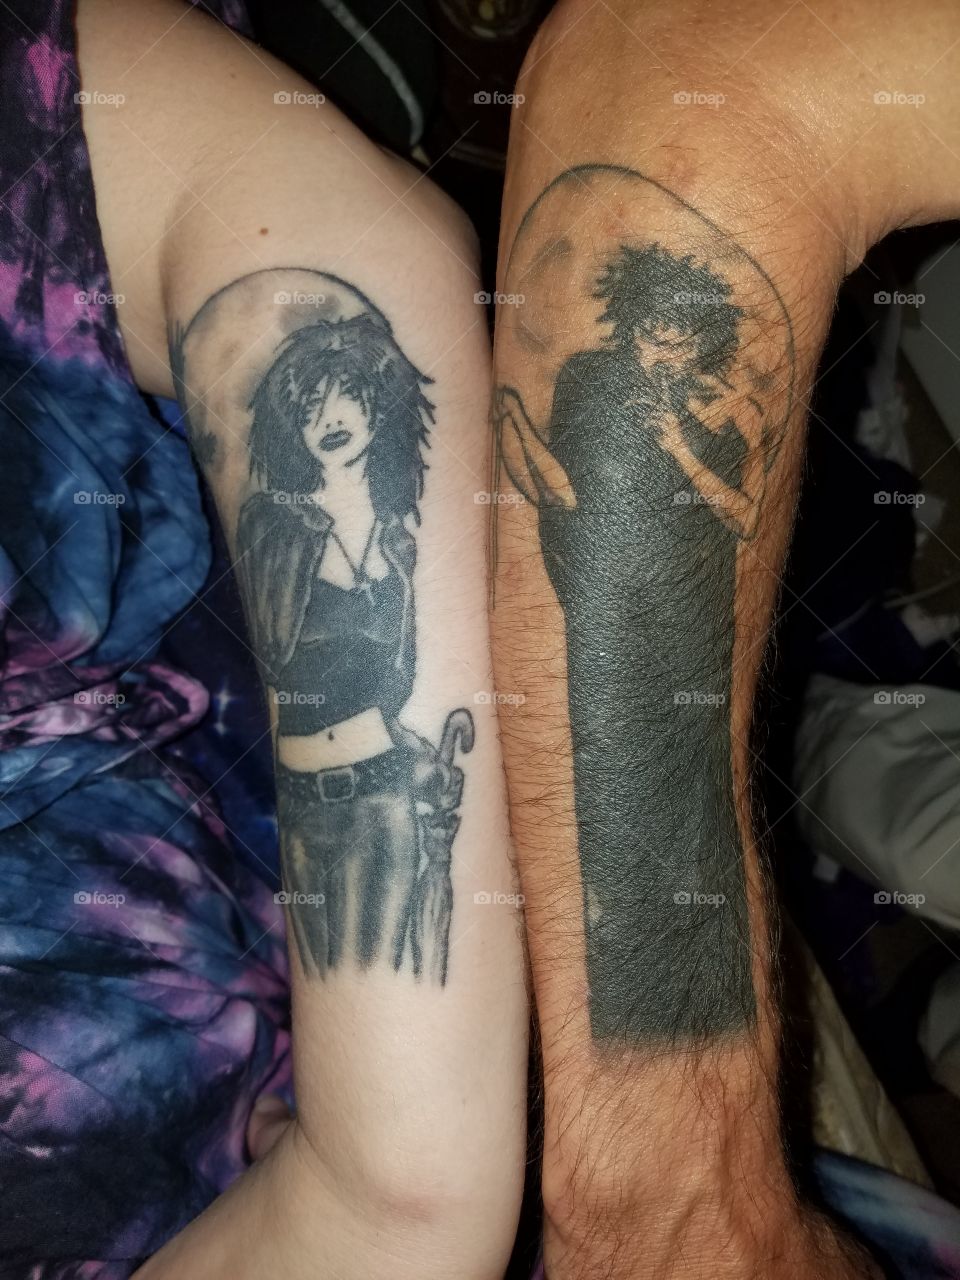 Death and Dream (Sandman) from the DC Vertigo comic series.  These are the matching tattoos my husband and I got in 2015.